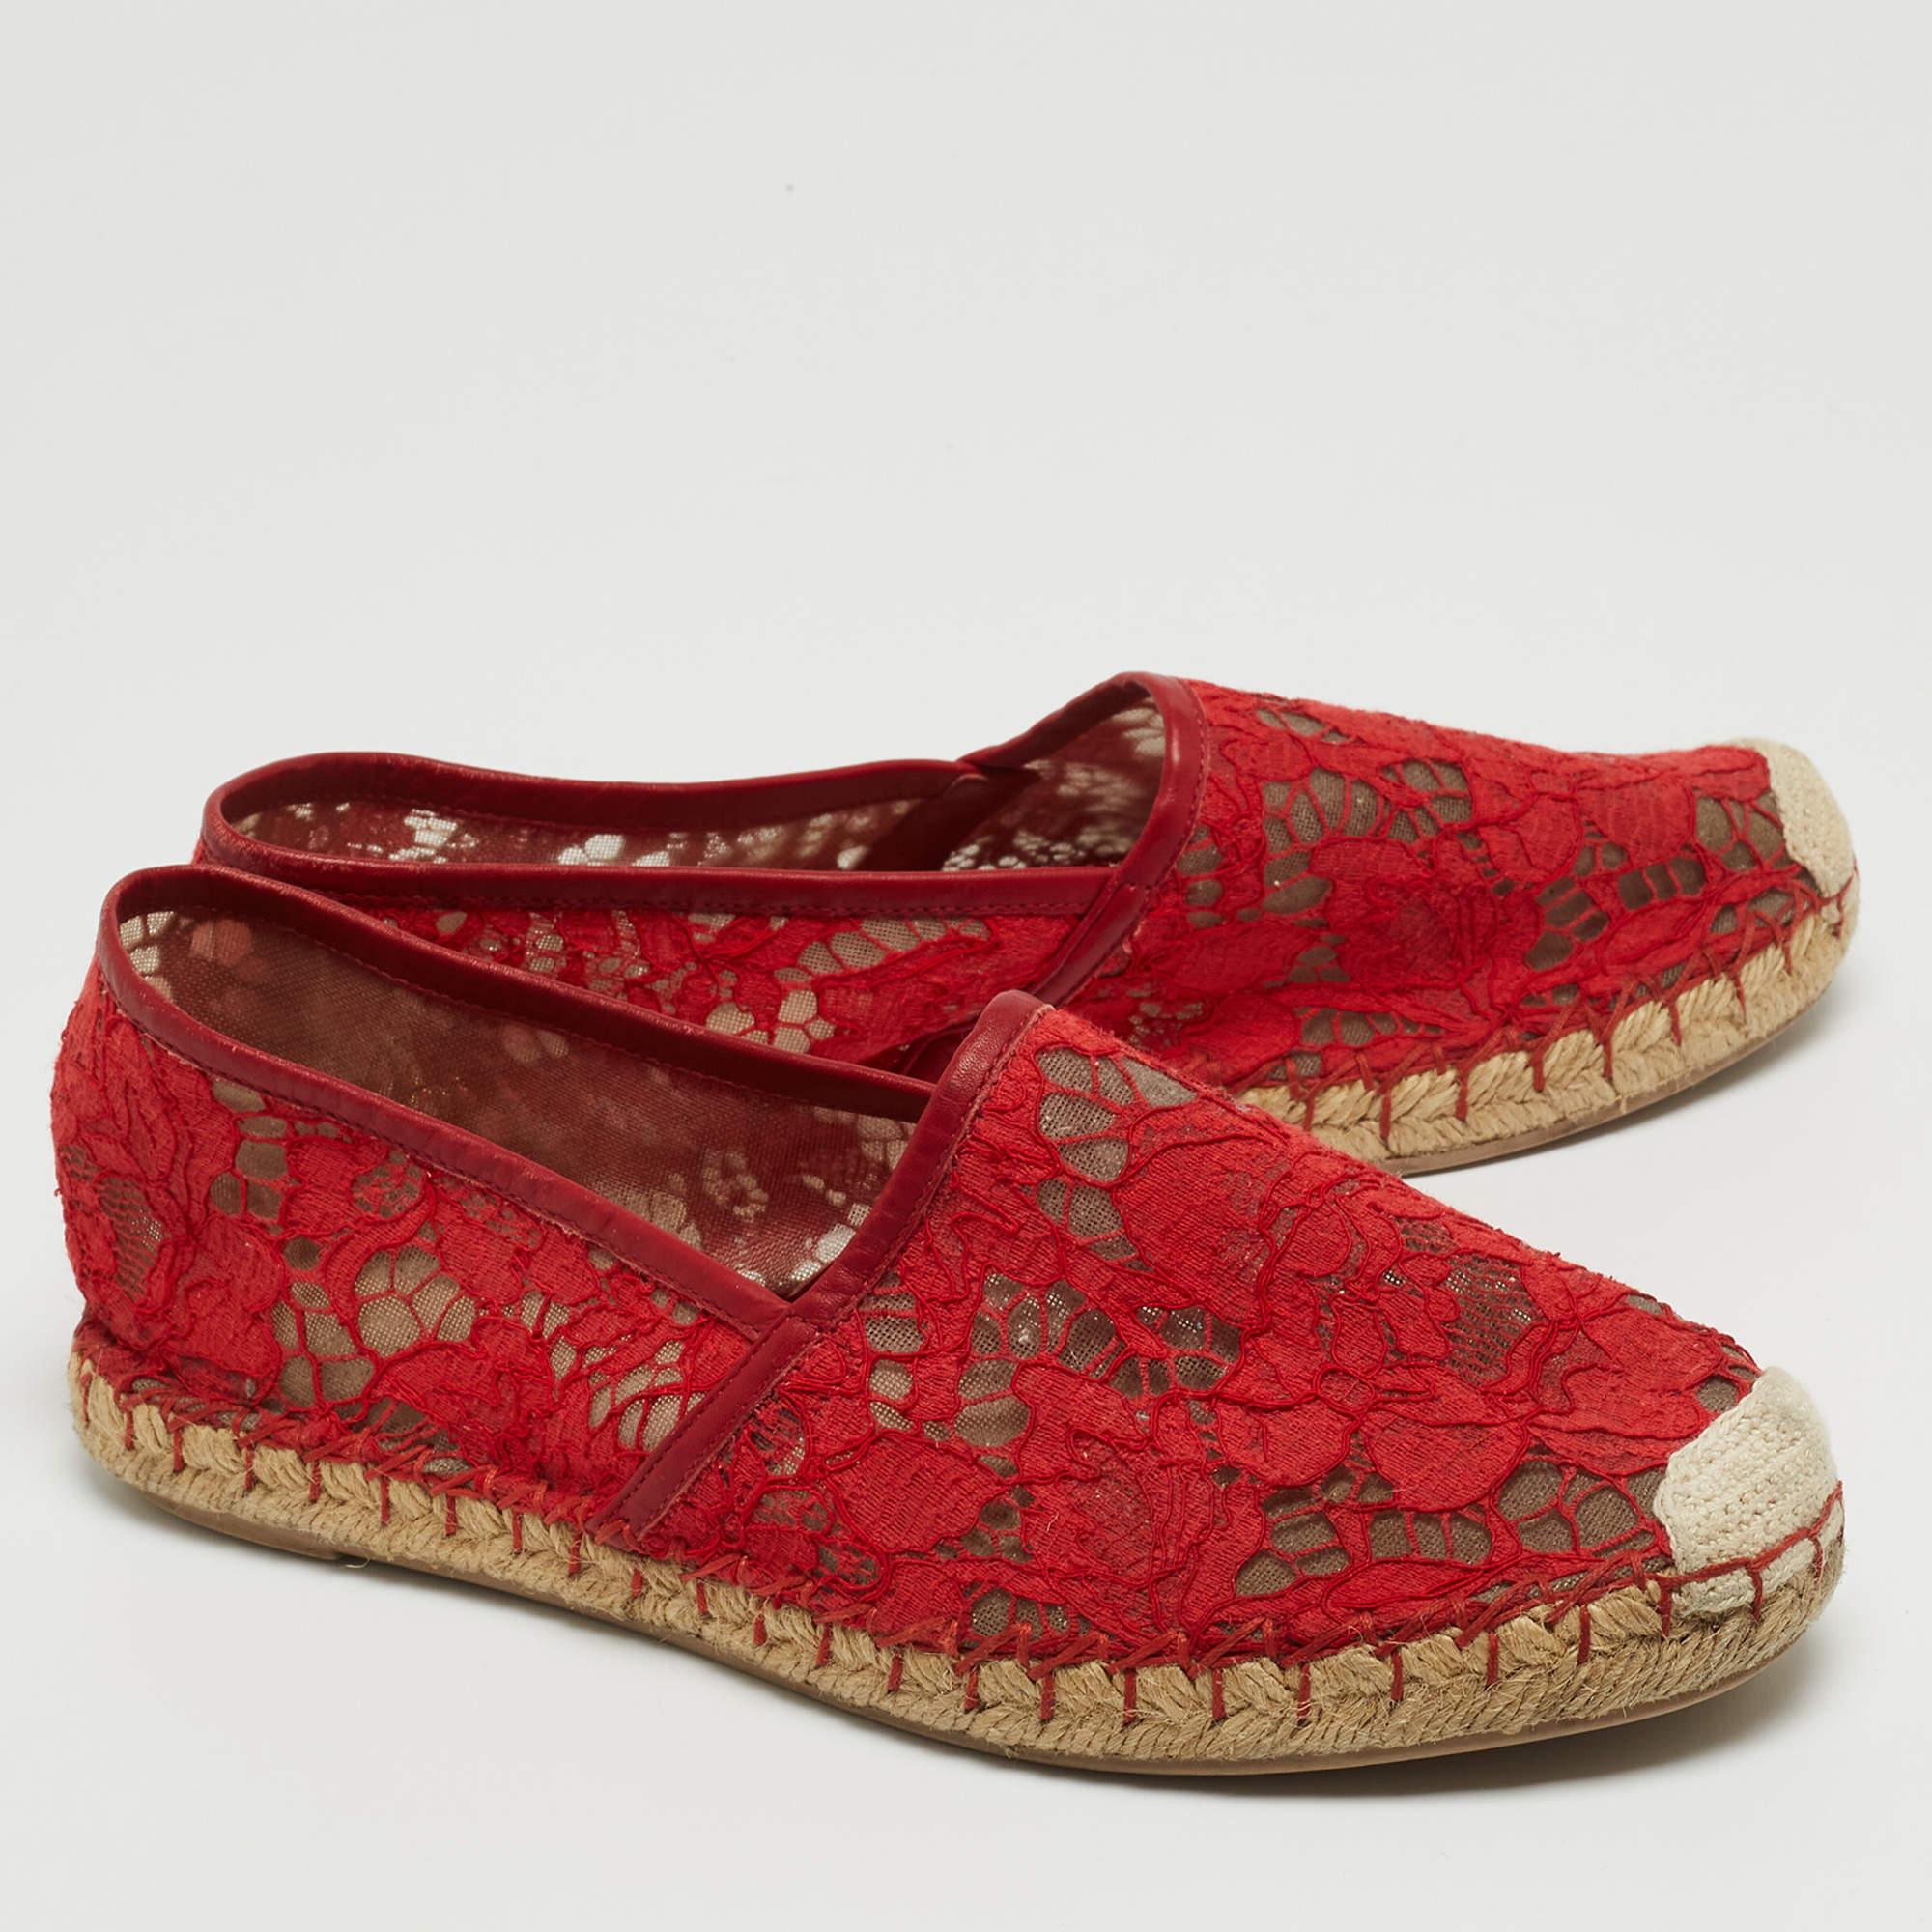 Valentino Red Lace Espadrille Flats Size 38 1